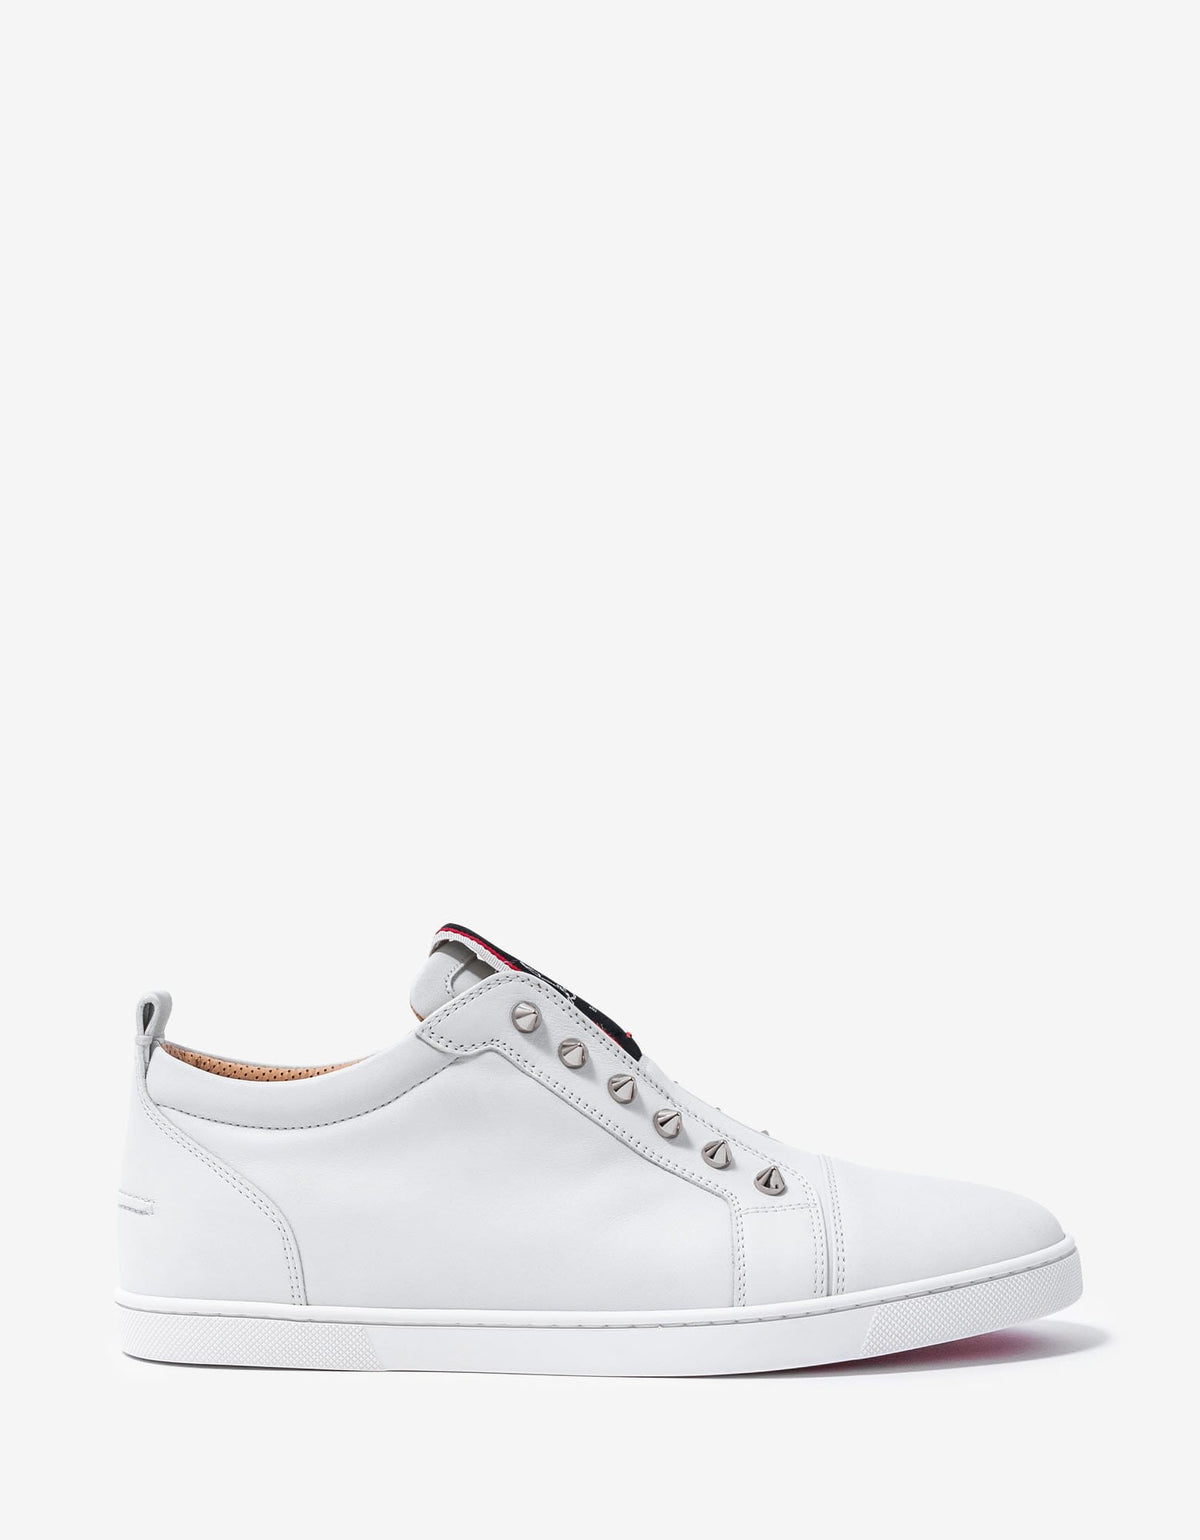 Christian Louboutin - F.A.V Fique A Vontade White Leather Trainers -